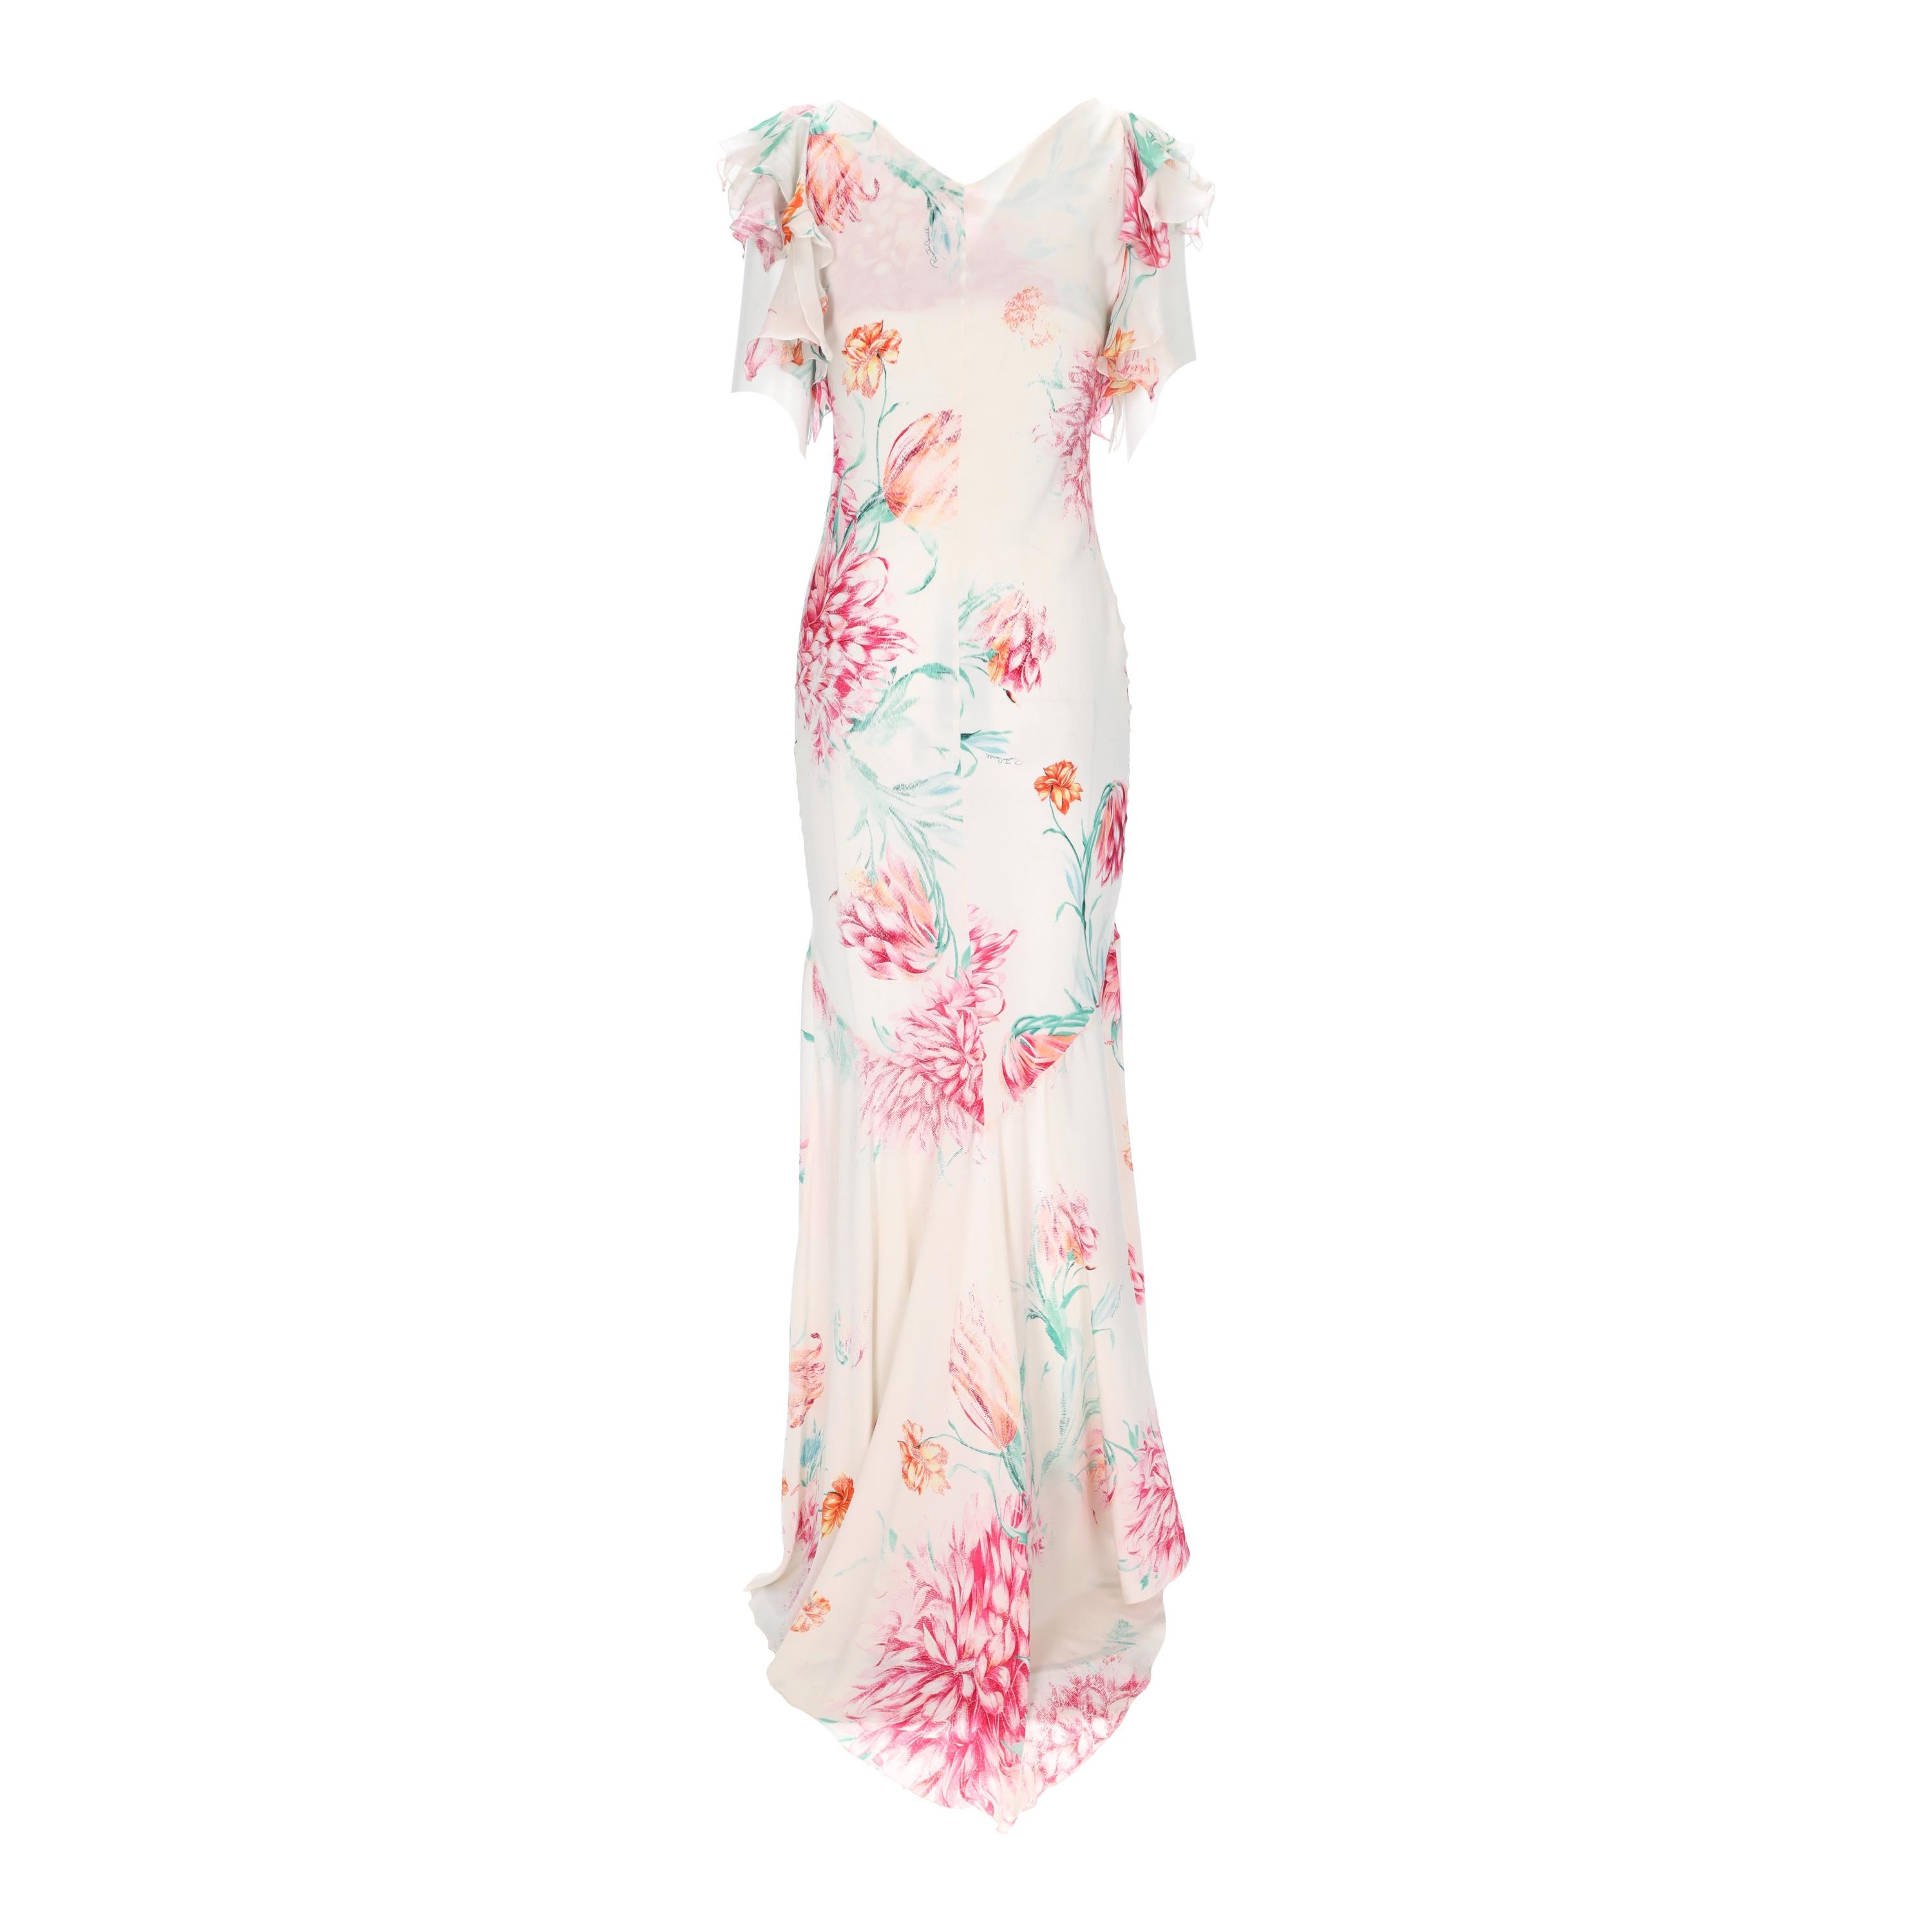 Roberto Cavalli Ruffle Sleeve Floral Dress In Excellent Condition For Sale In Milano, IT